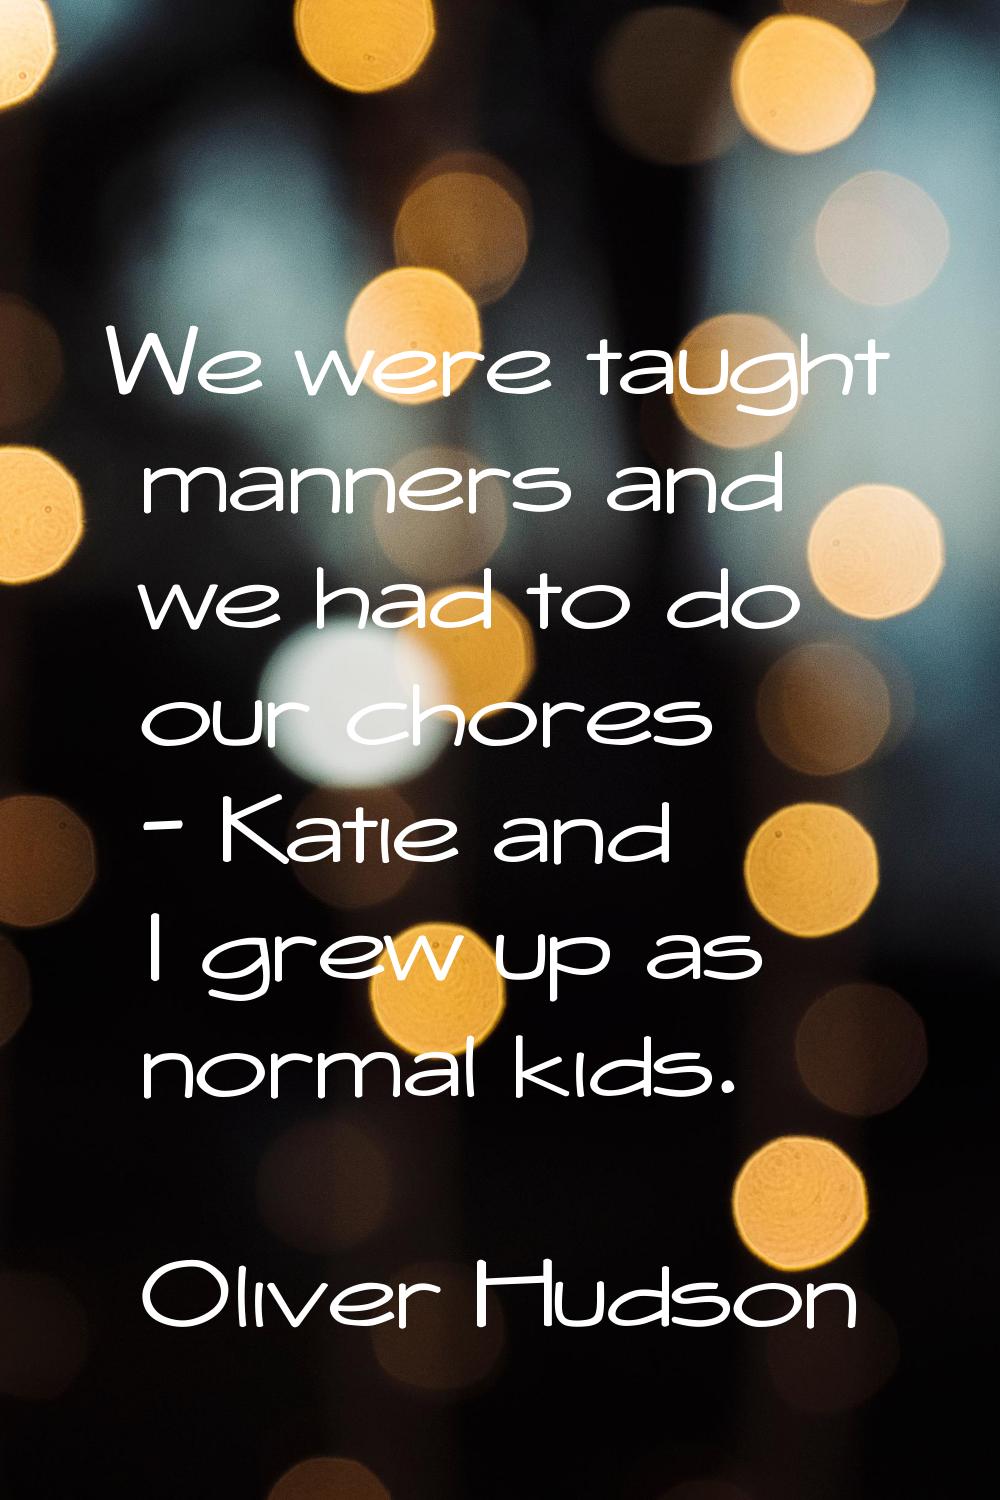 We were taught manners and we had to do our chores - Katie and I grew up as normal kids.